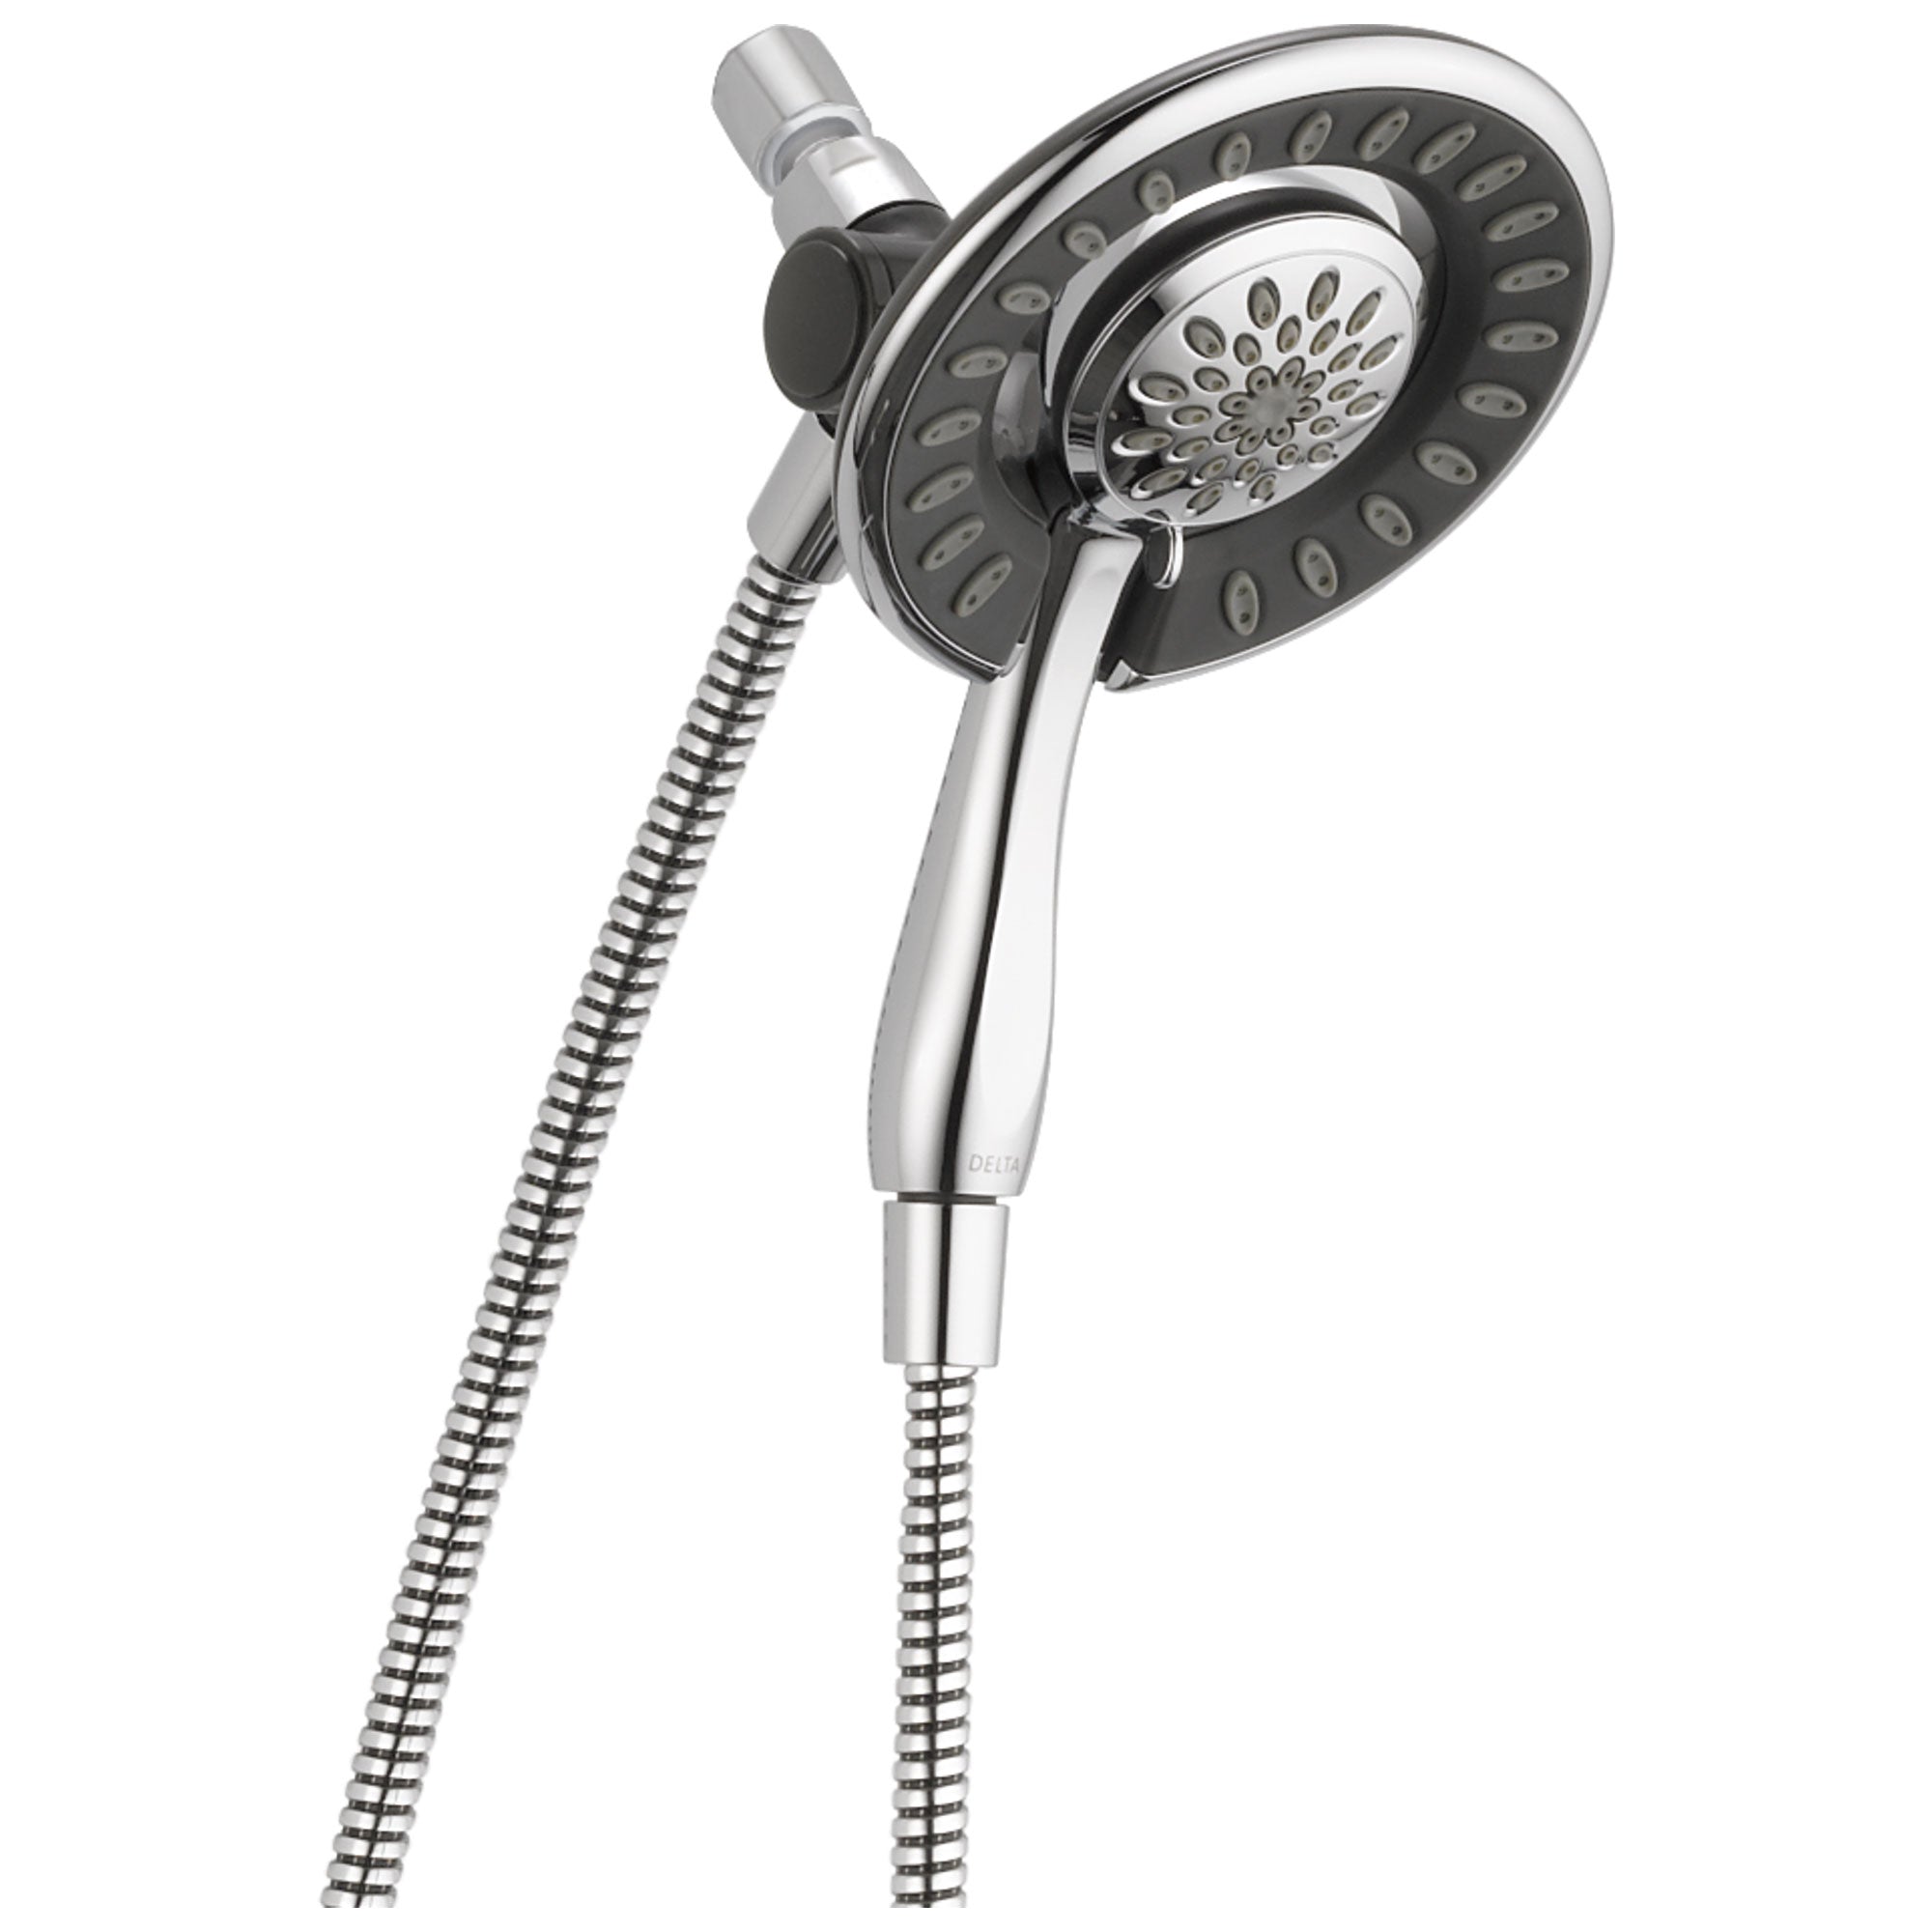 Delta Chrome Finish Shower Arm Mount In2ition Two-in-One Hand Spray and Showerhead Combination DRP63838